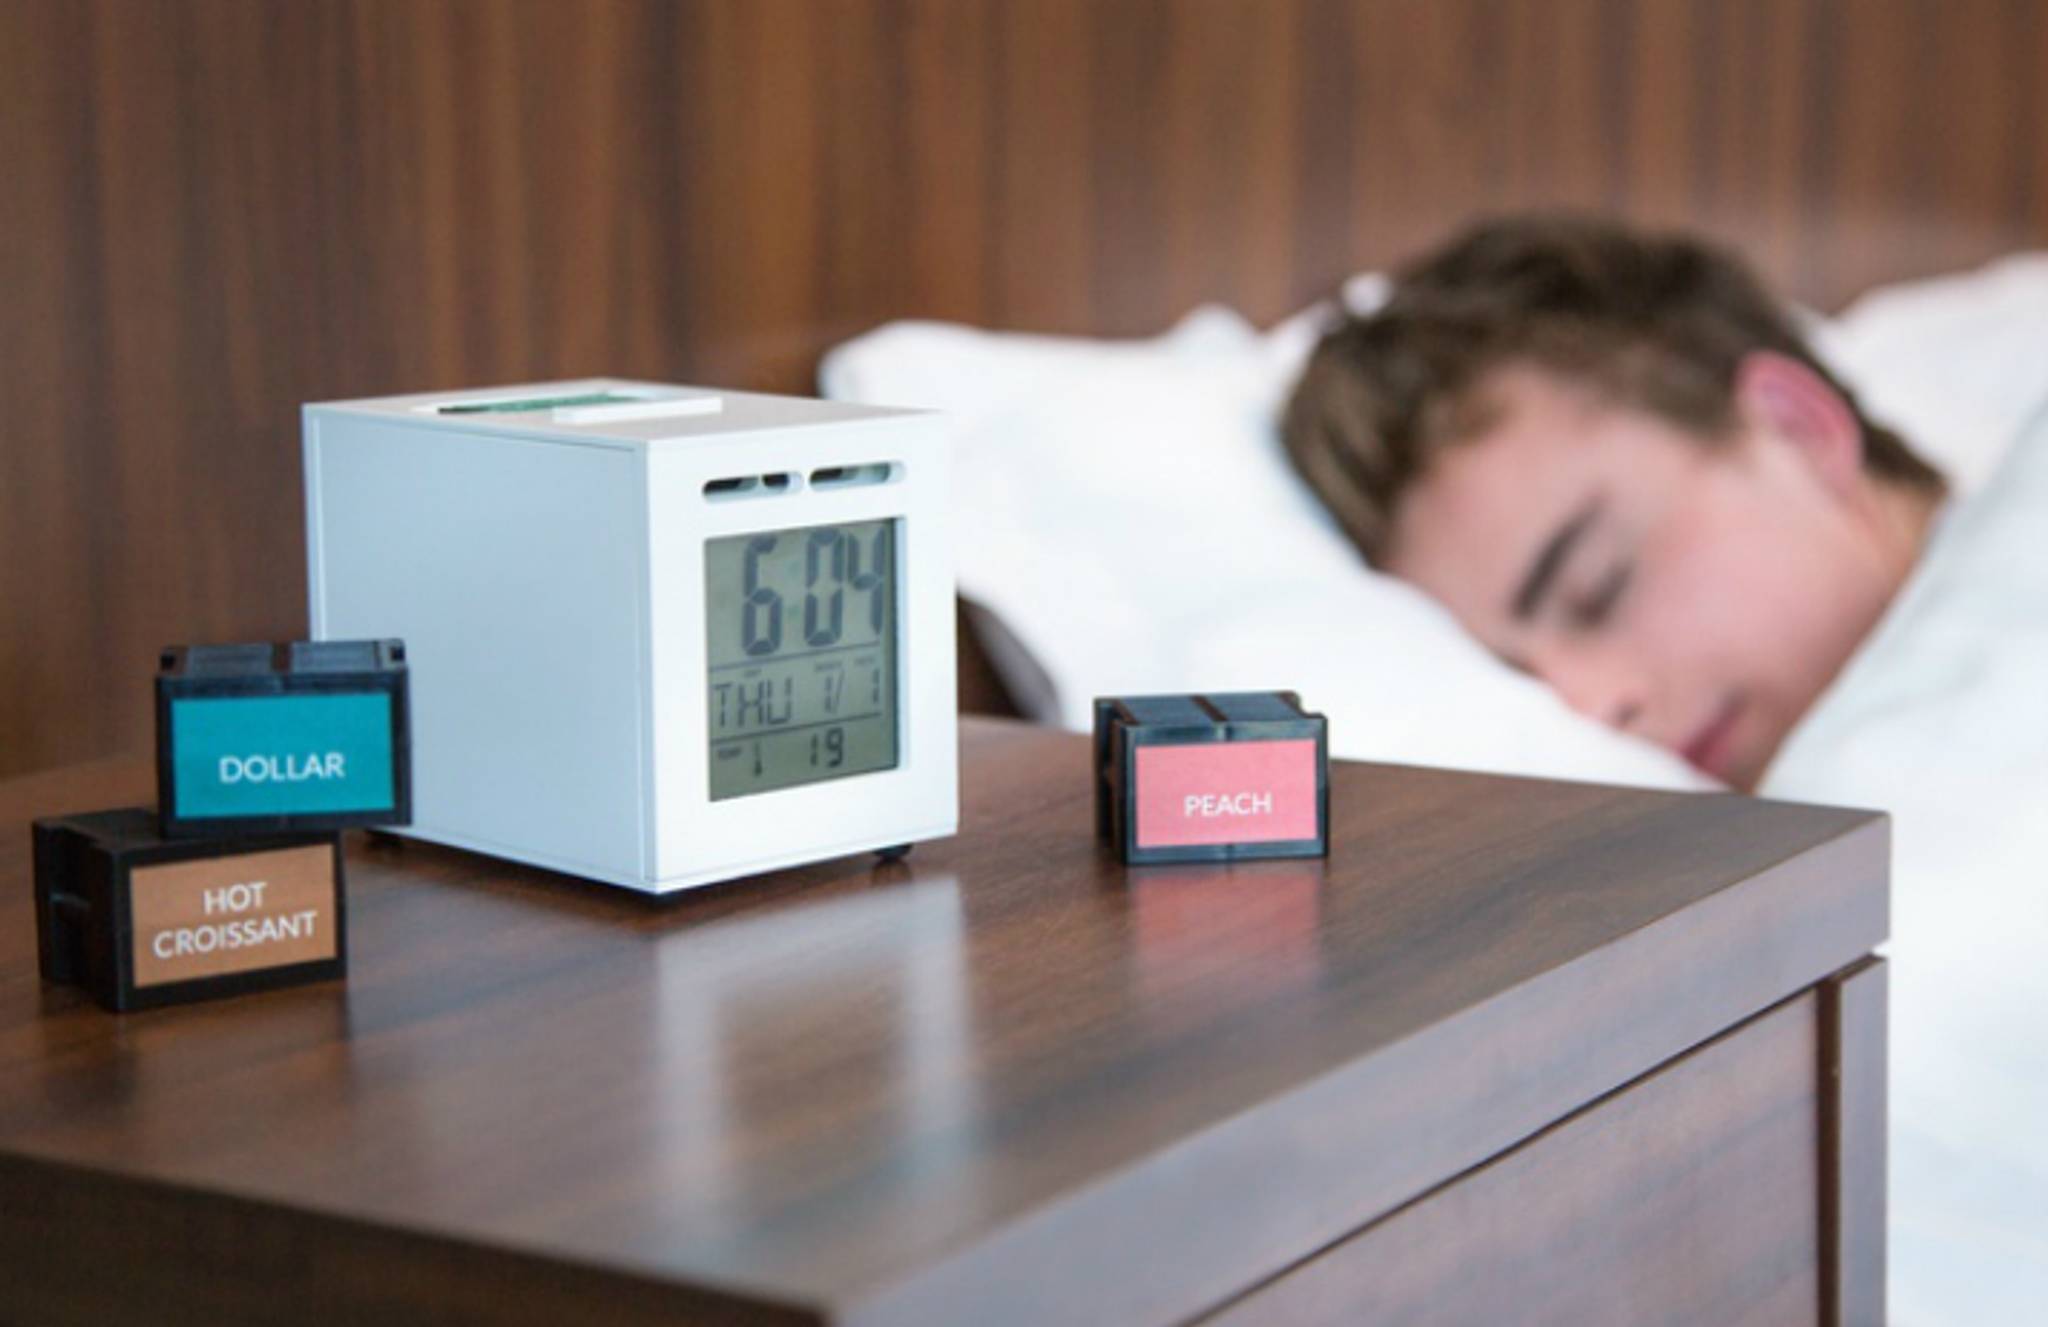 This alarm clock wakes you with smells